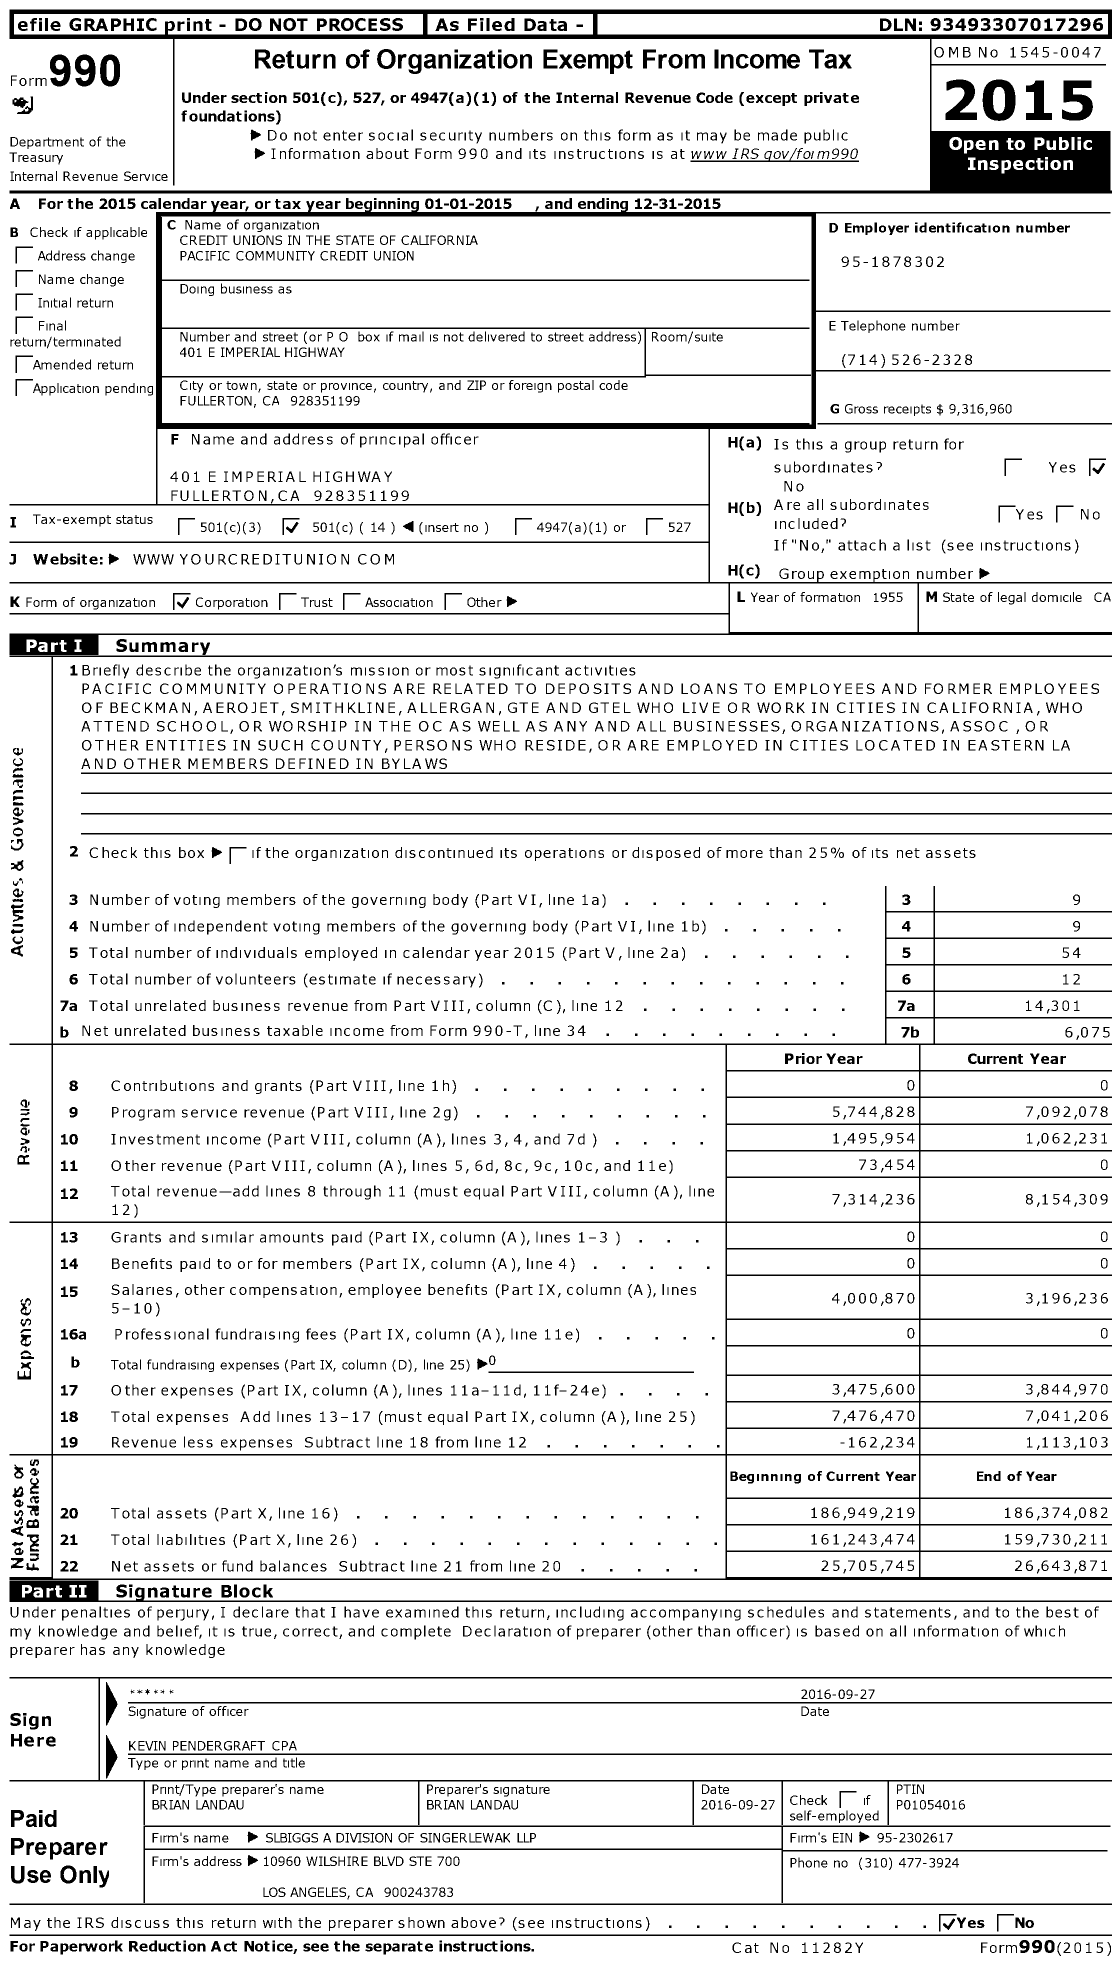 Image of first page of 2015 Form 990O for Credit Unions in the State of California Pacific Community Credit Union